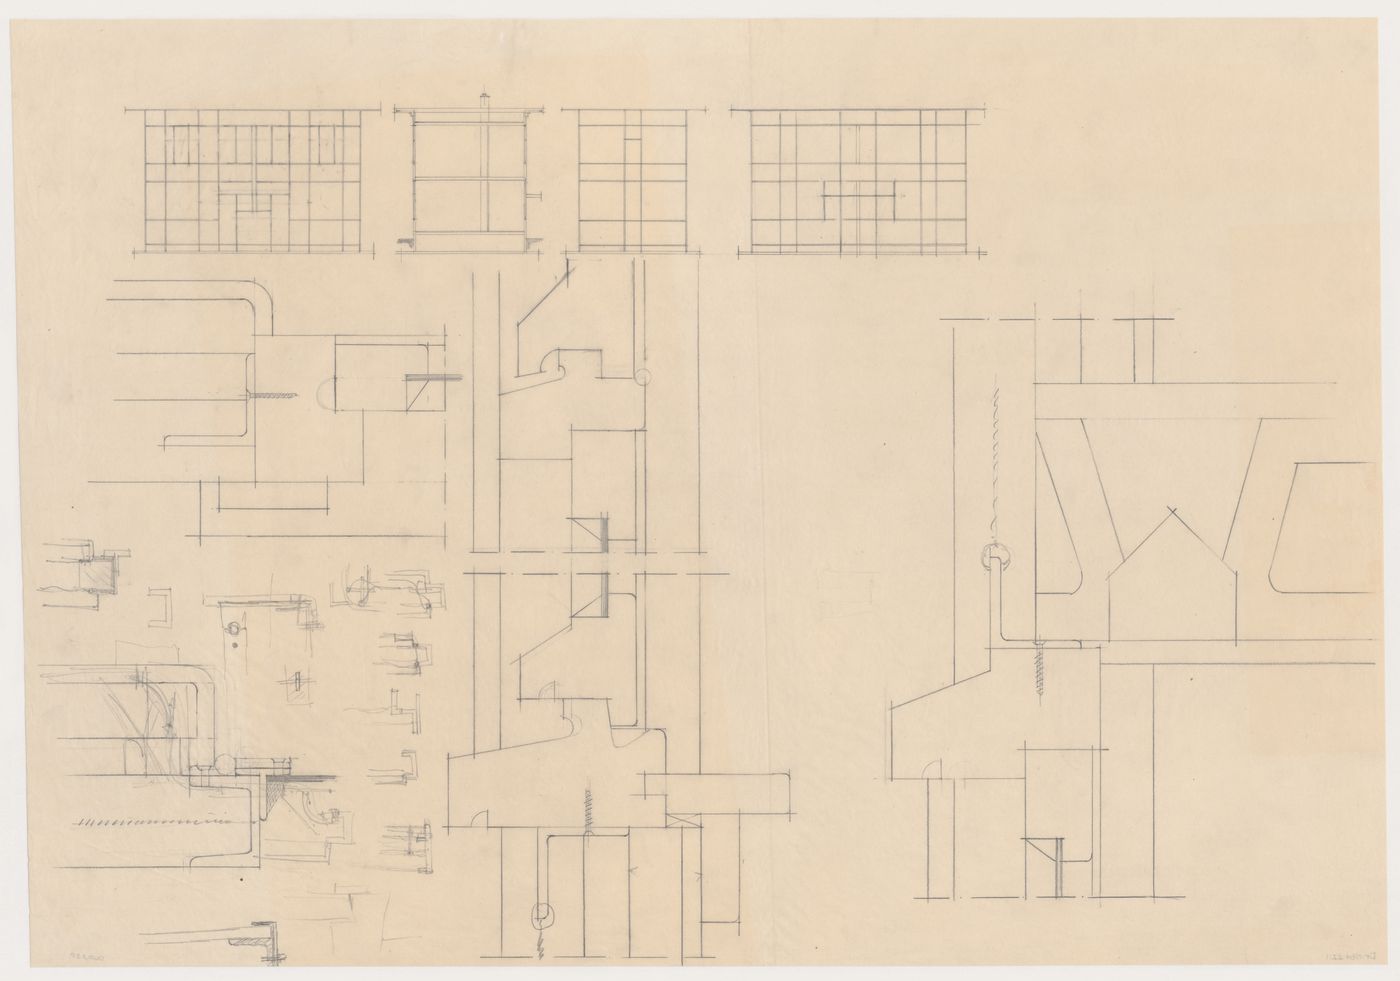 Elevations and sections for a double worker's dwelling in reinforced concrete, Rotterdam, Netherlands